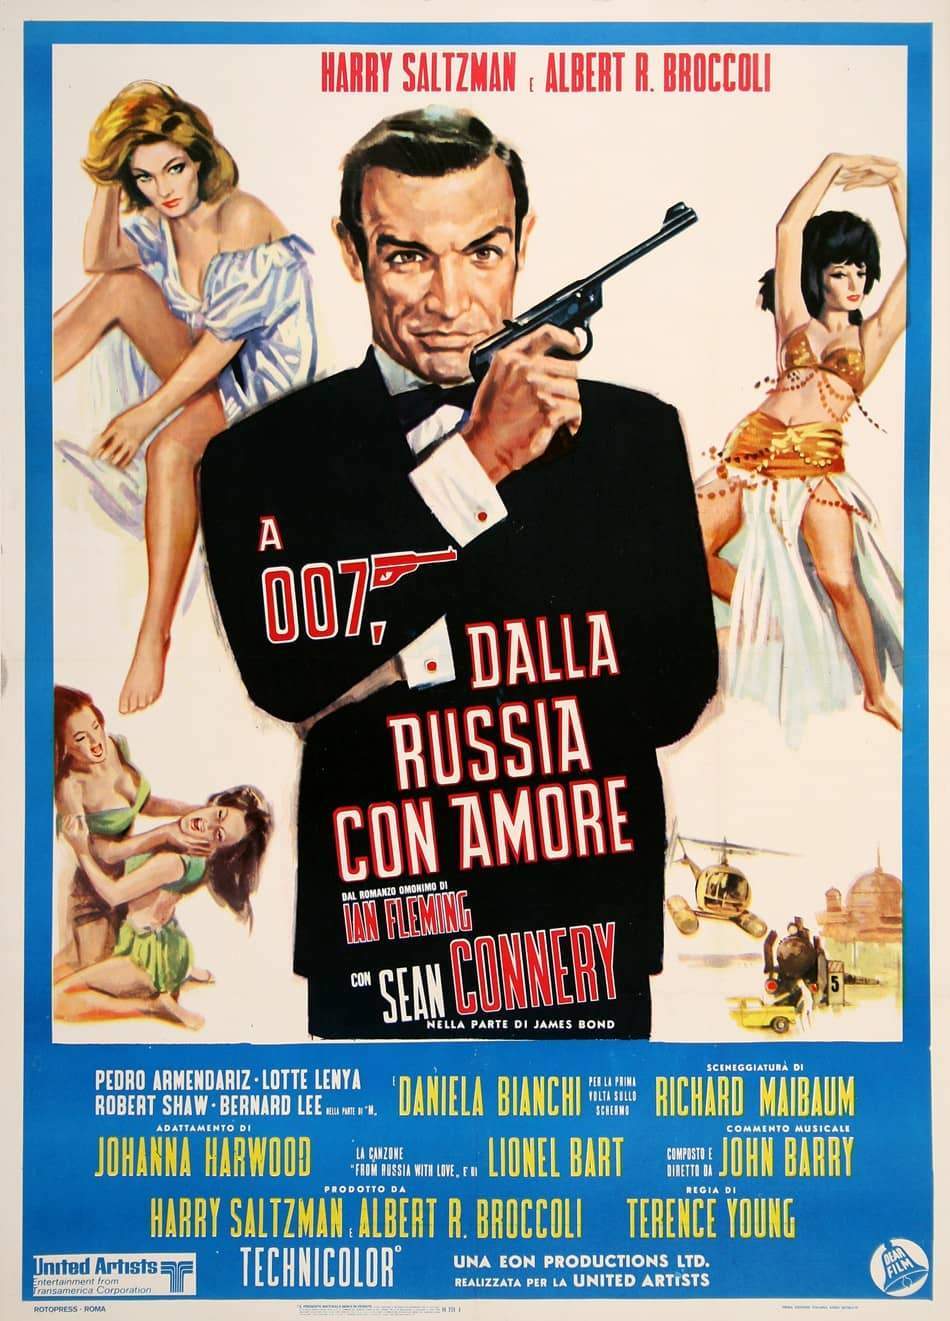 Italian James Bond Poster From Russia With Love - Sean Connery c1971